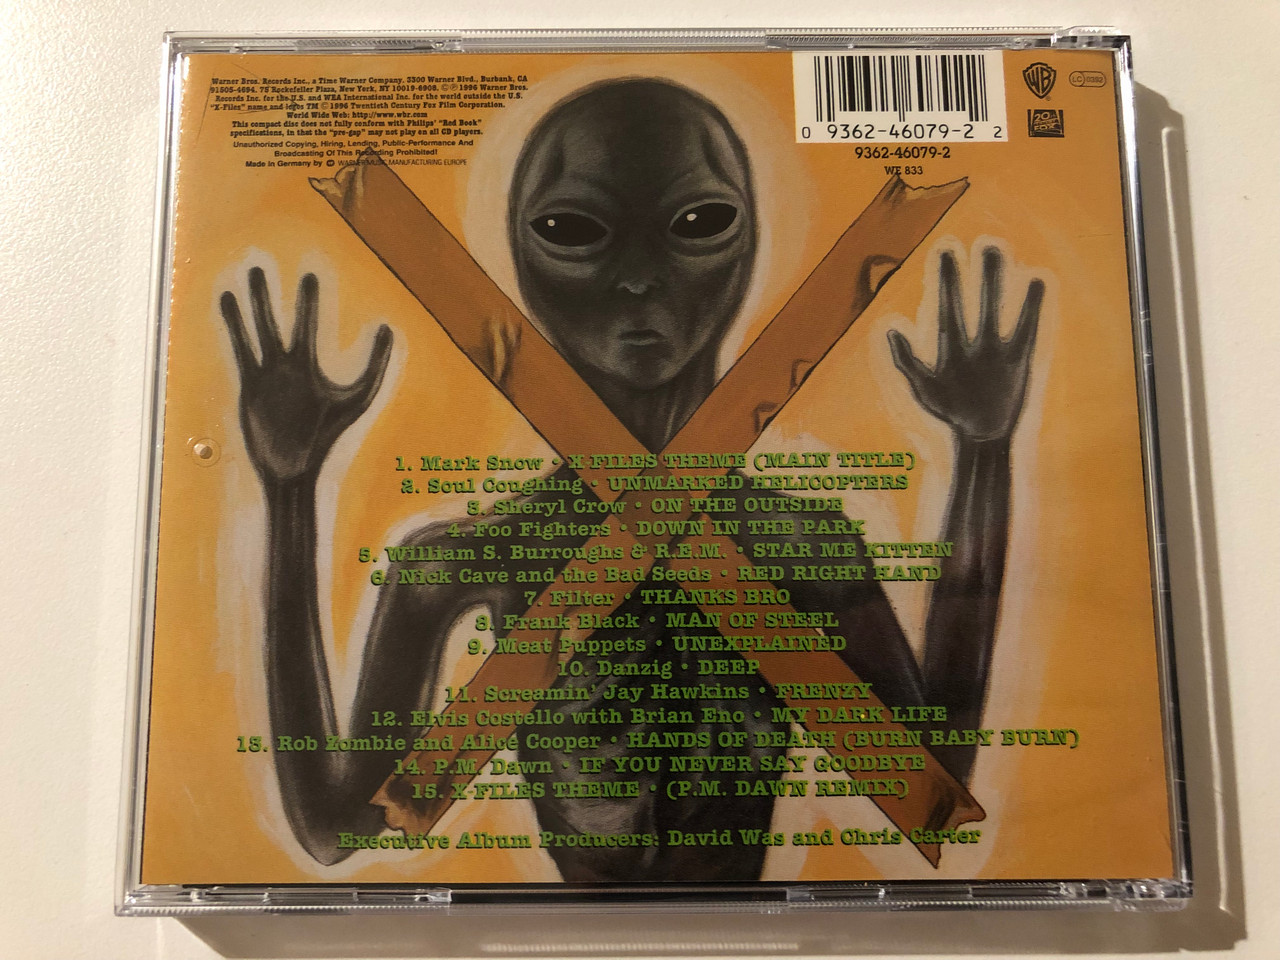 Songs In The Key Of X: Music From And Inspired By The X-Files Executive  Album Producers: David Was and Chris Carter Audio CD bibleinmylanguage